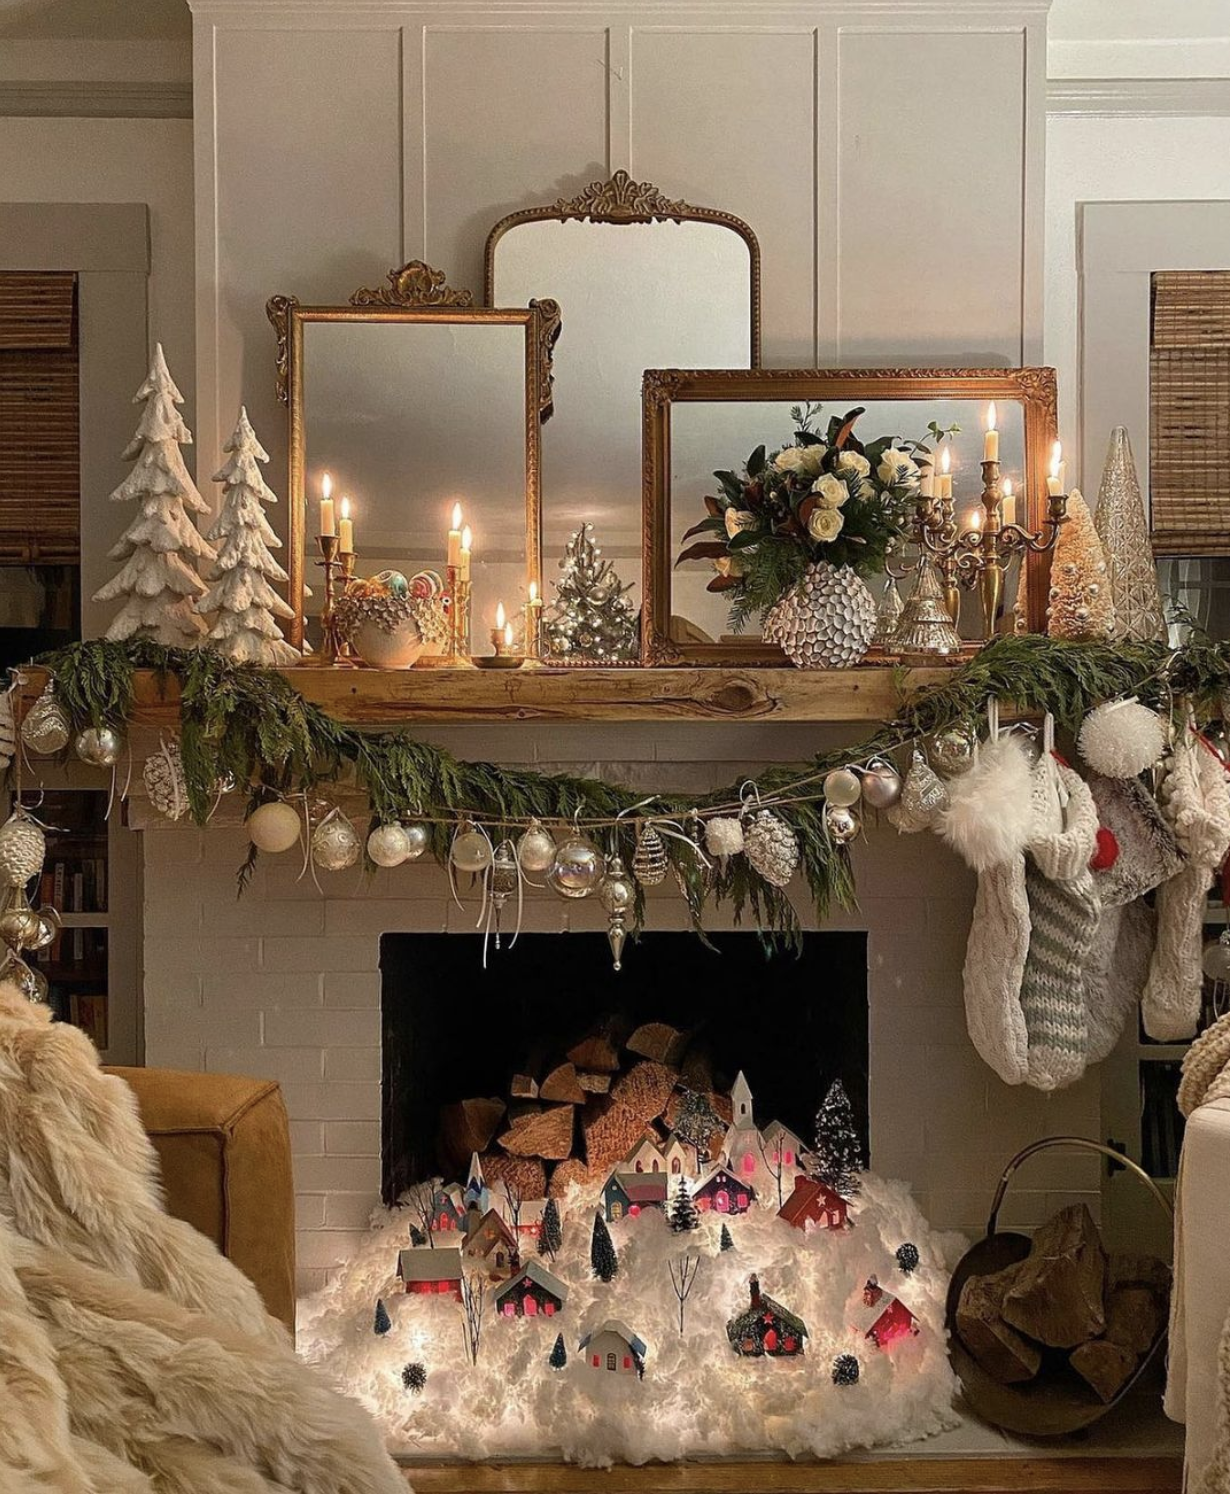 Christmas Decoration Ideas & Tips For Your Home